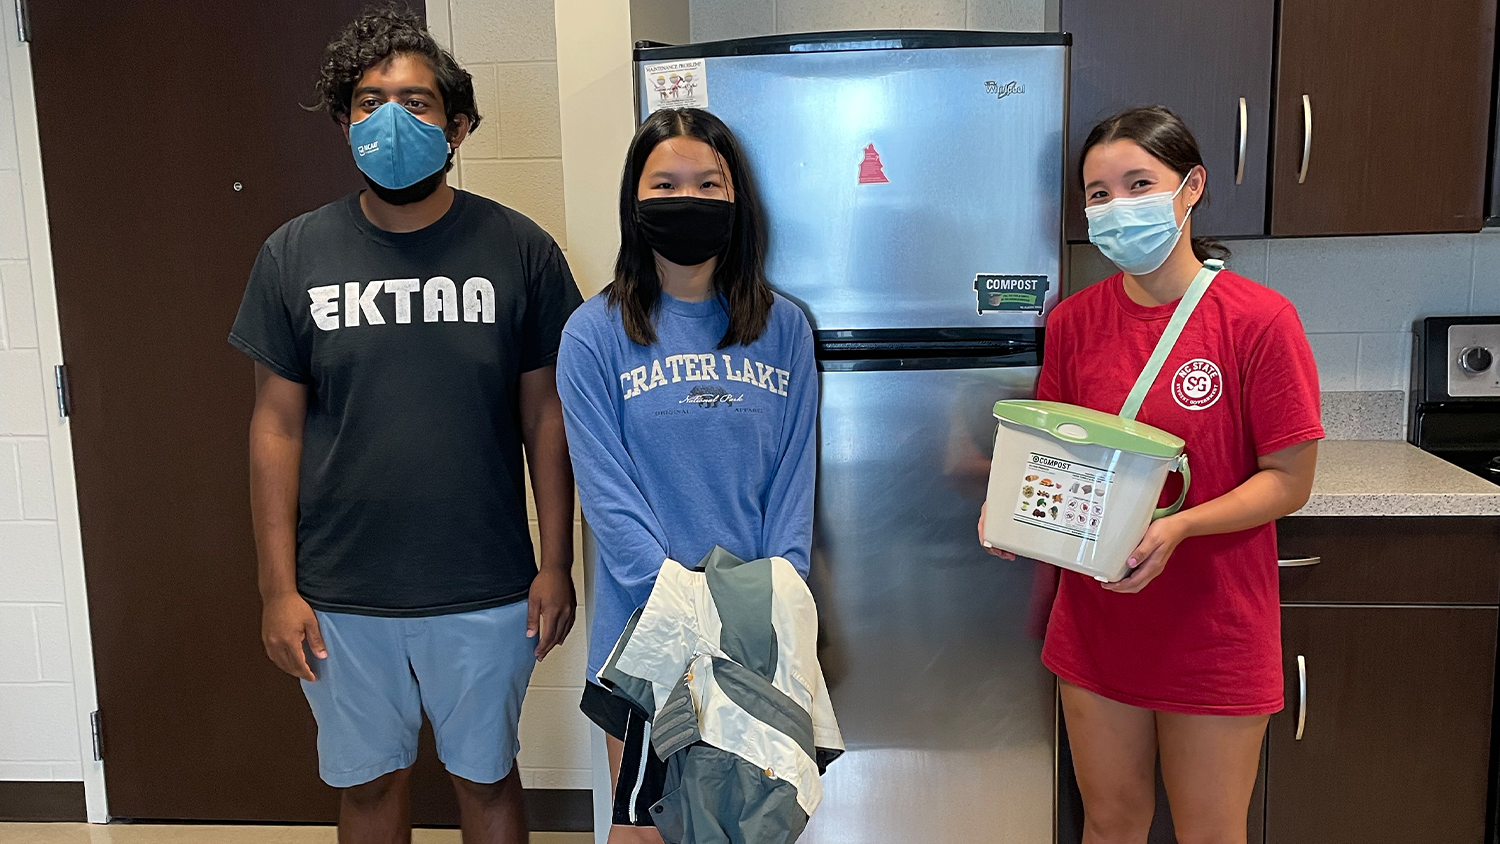 Three students stand in an apartment kitchen, with one holding a compost bucket